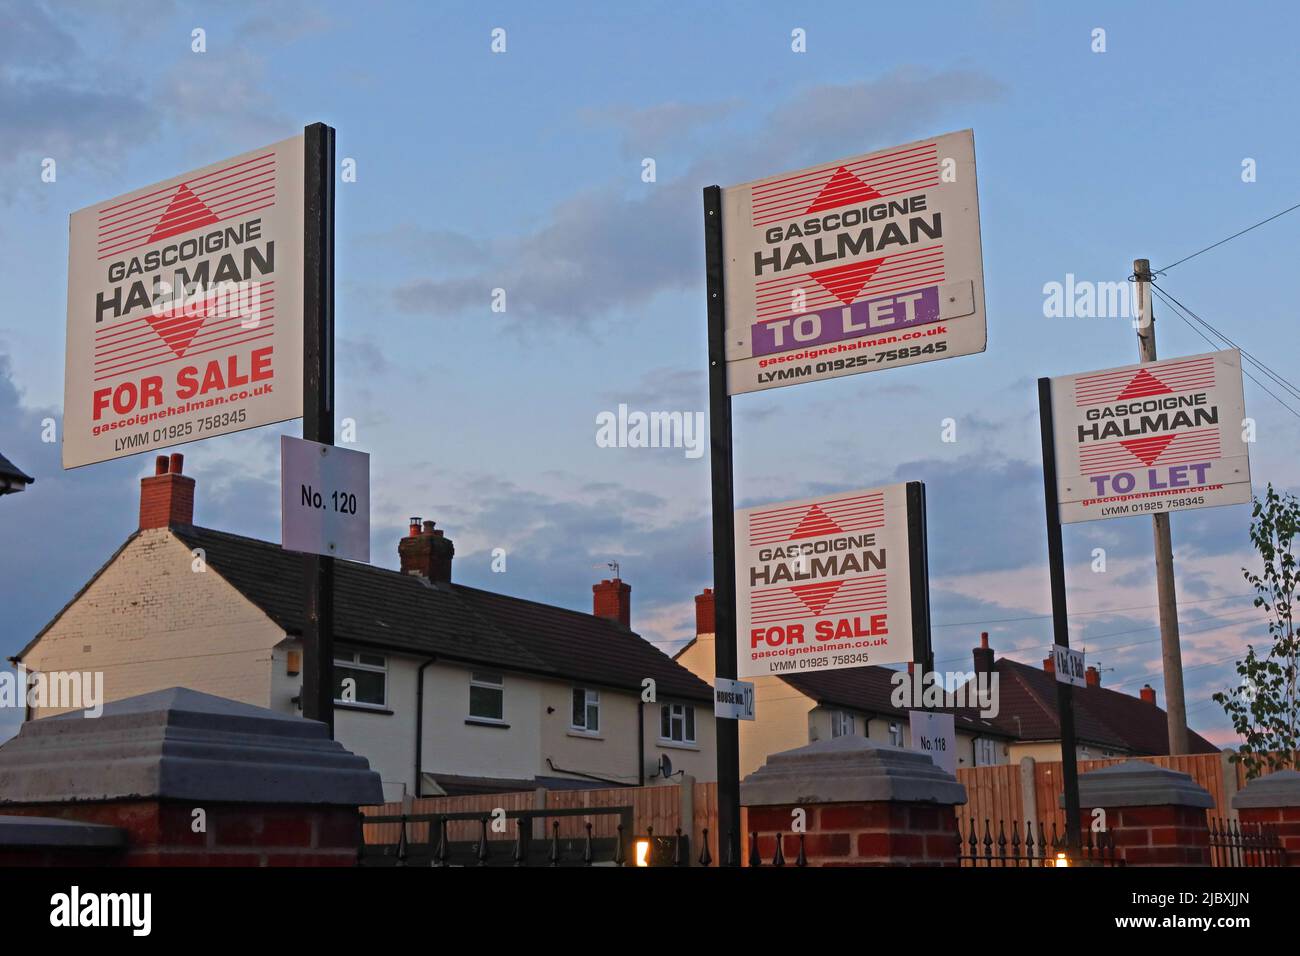 For Sale, Property Signs, Gascoigne Halman, To Let, Lymm, A56,Warrington, Cheshire, England, UK Stock Photo